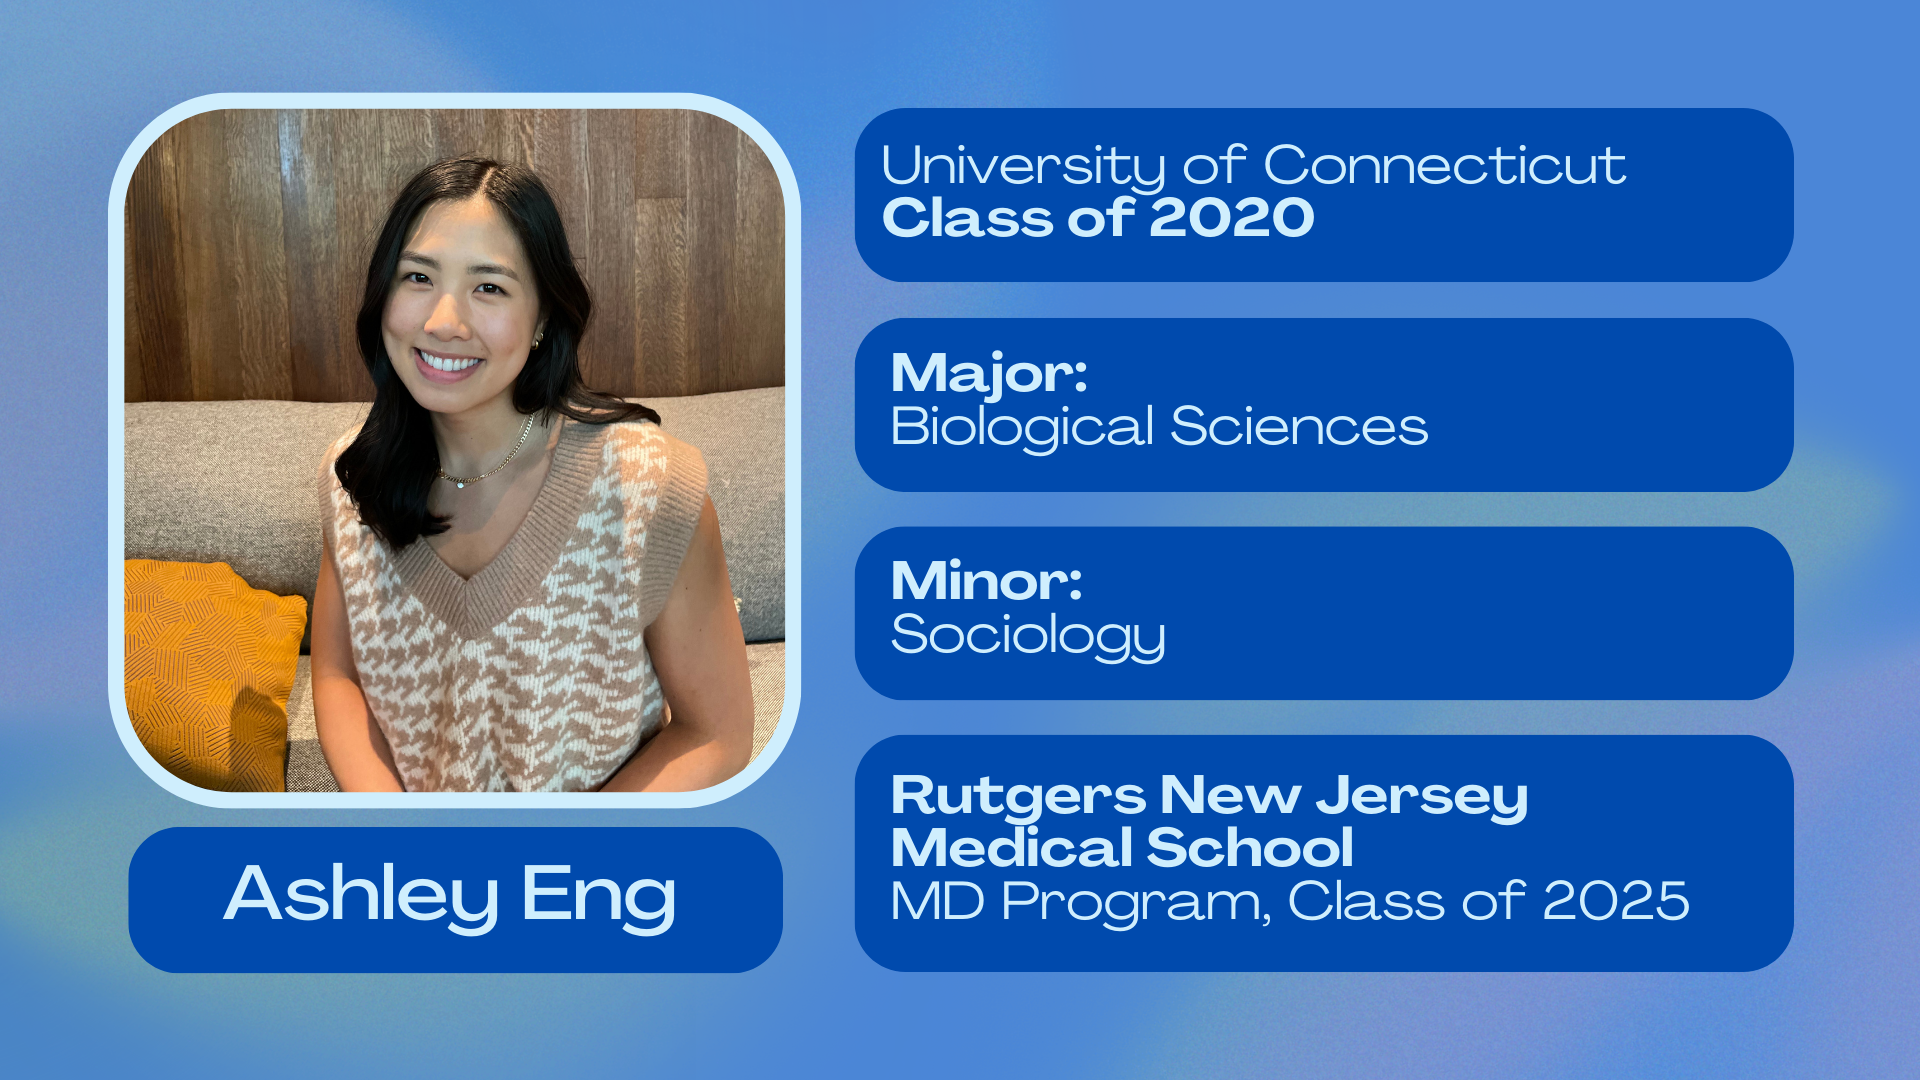 Ashley Eng; University of Connecticut class of 2020; Major: Biological Sciences; Minor: Sociology; Rutgers New Jersey Medical School class of 2025